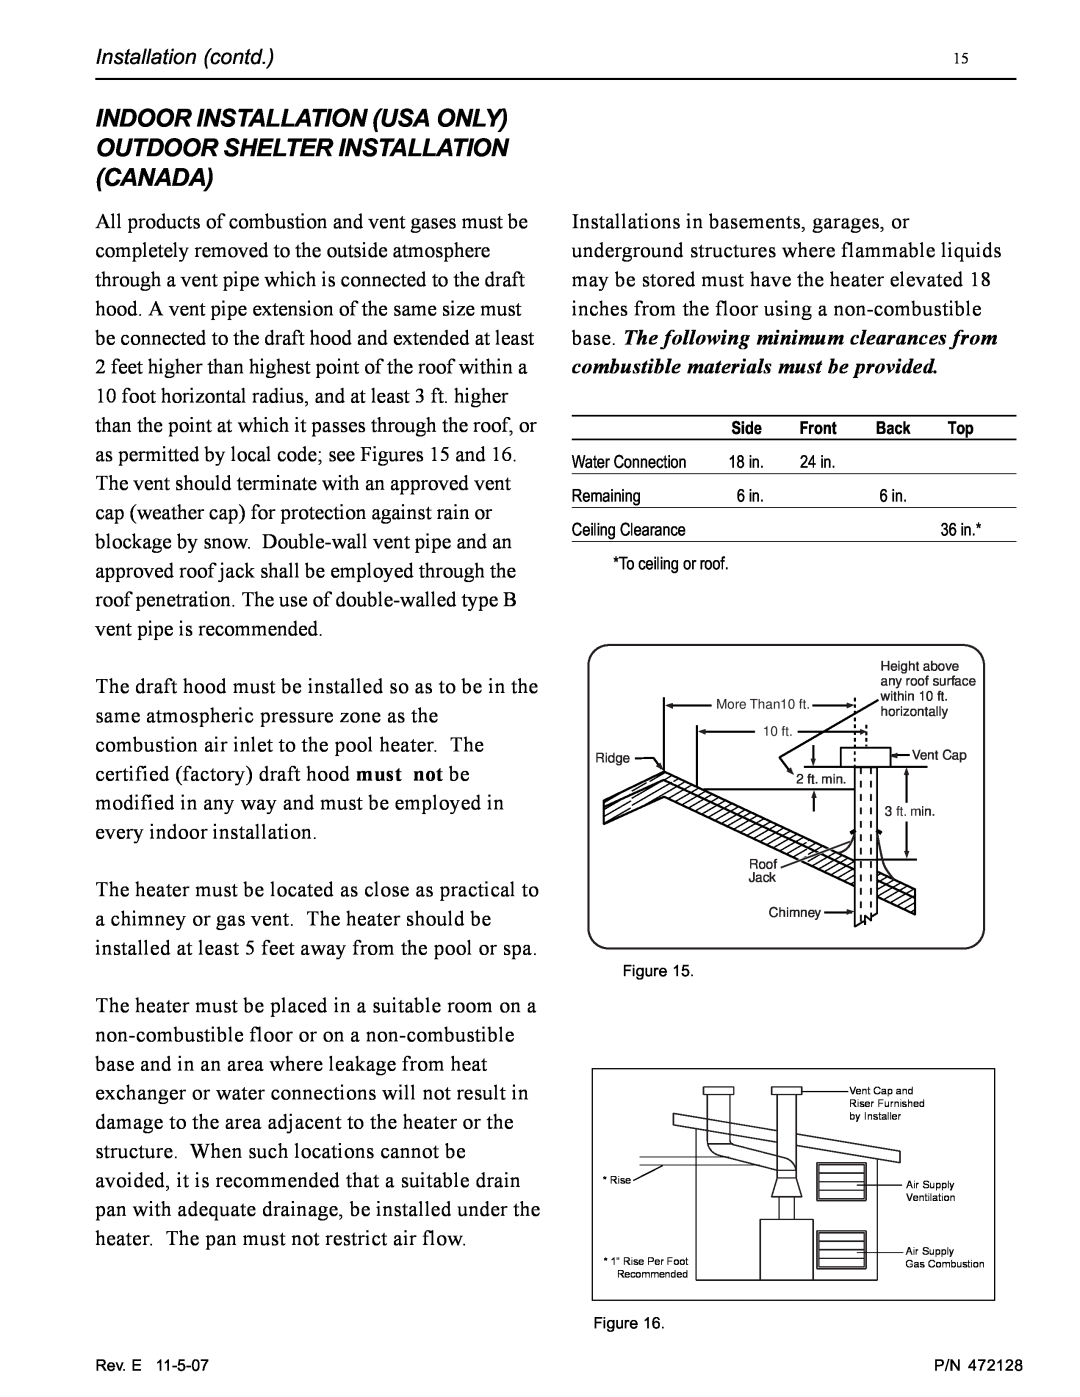 Pentair Hot Tub manual Indoor Installation Usa Only Outdoor Shelter Installation Canada 